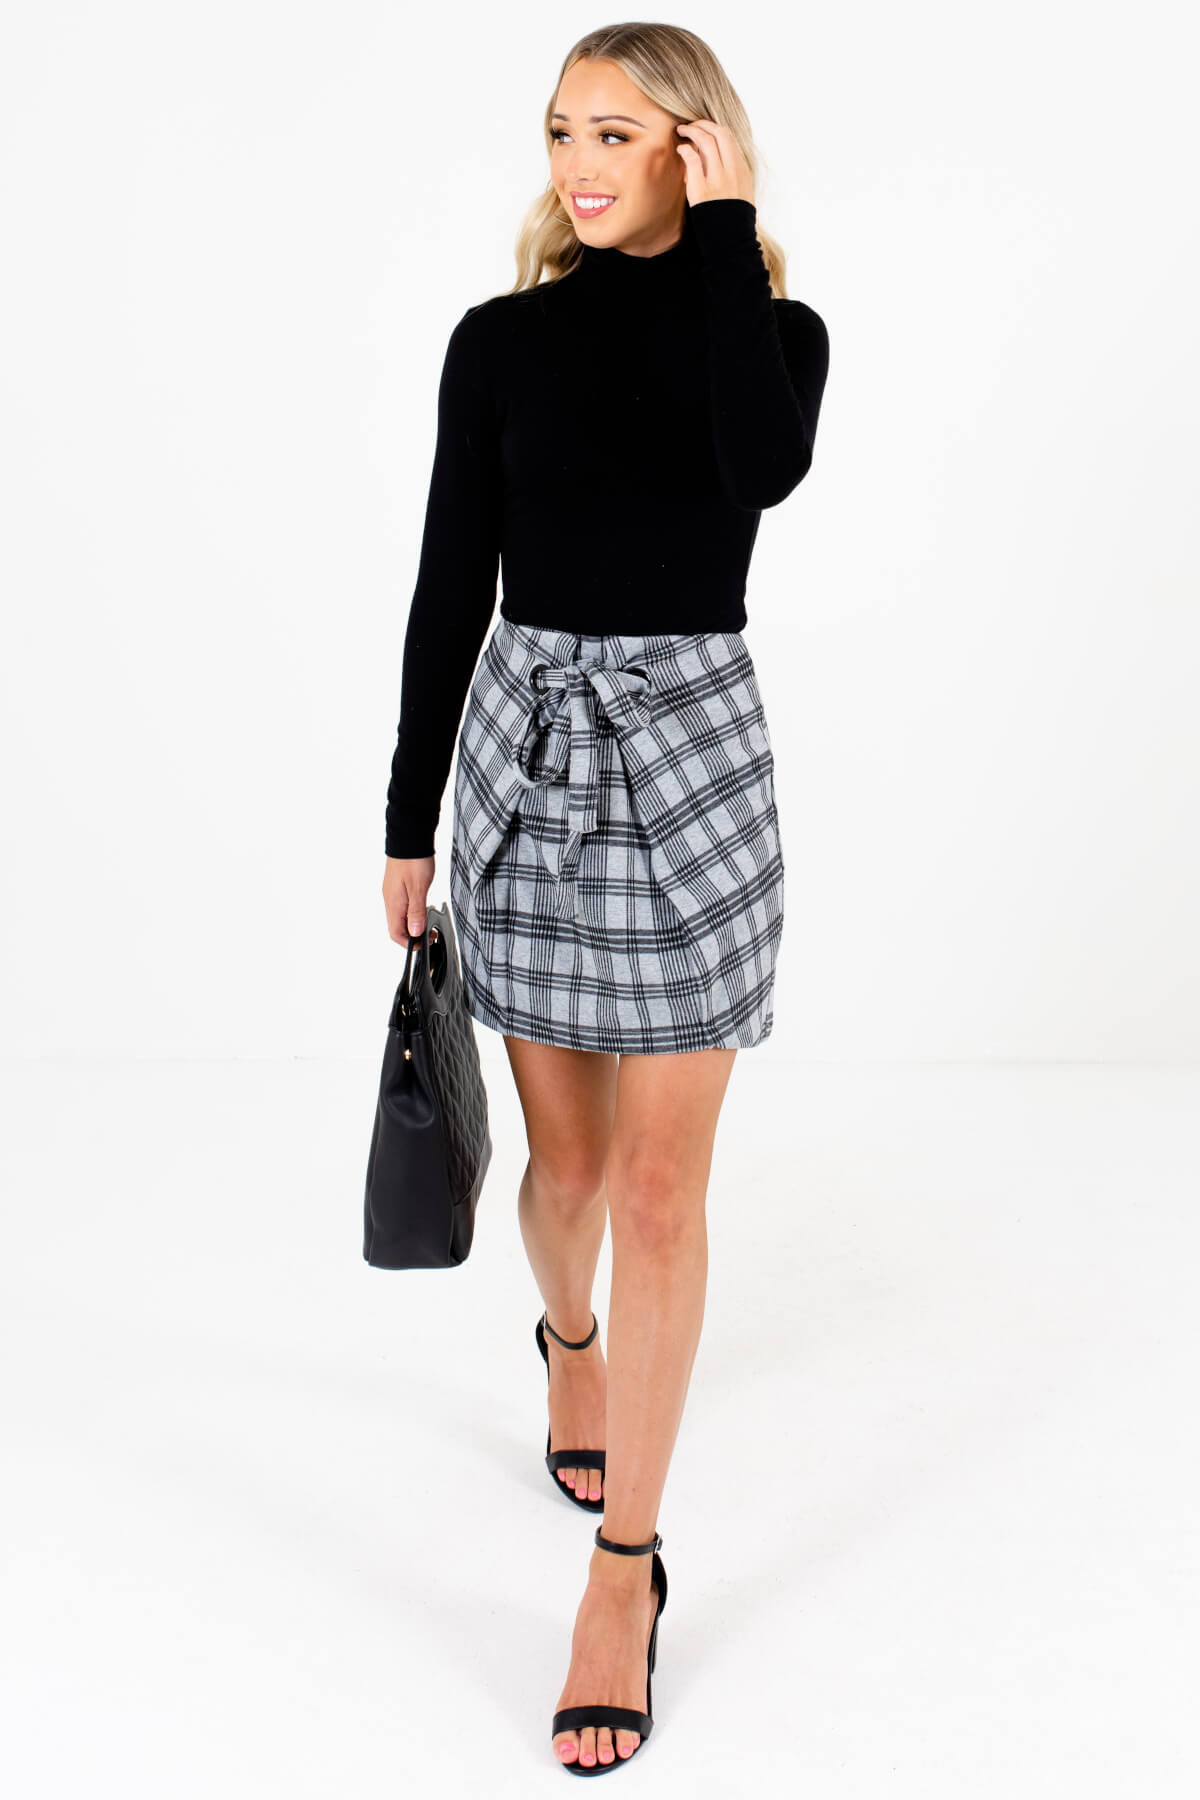 Women's Gray Plaid Business Casual Boutique Mini Skirts